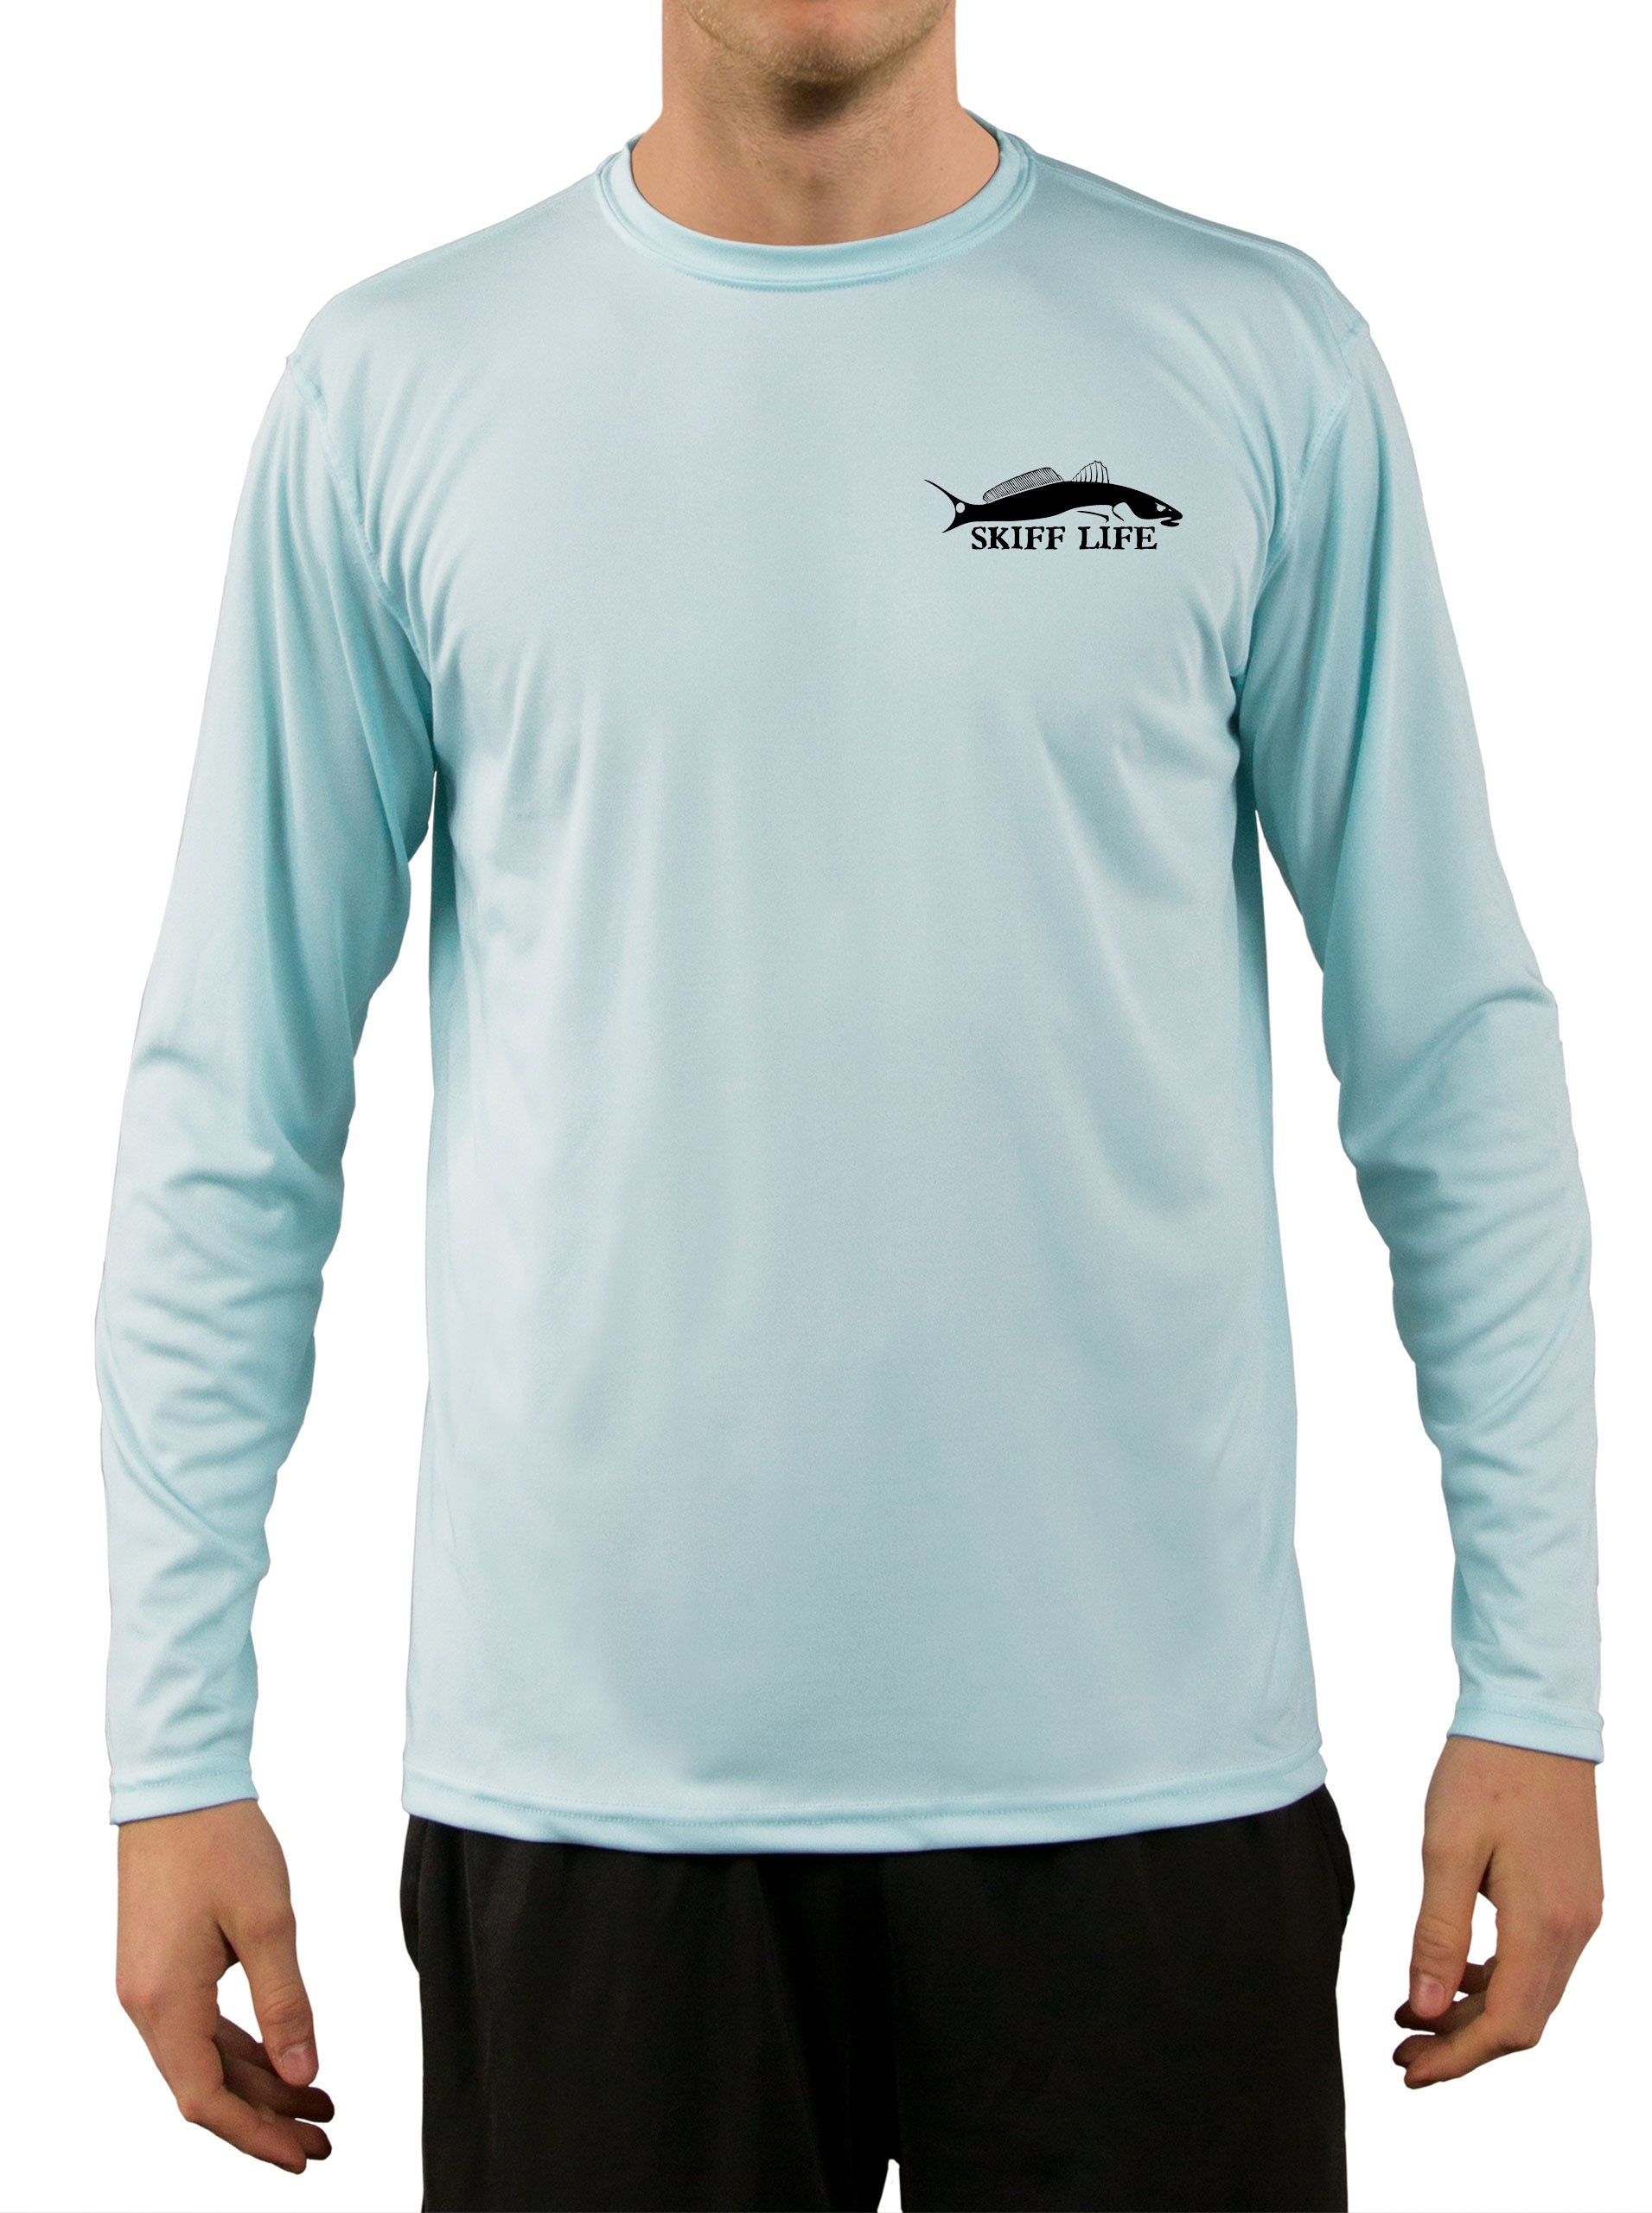 Yellowstone Ranch Men's Fishing Shirt Beth Dutton Ranch & Rip Long Sleeve, Moisture Wicking Fabric, Non-fading Print, 50+ UPF Fabric for UV Protection